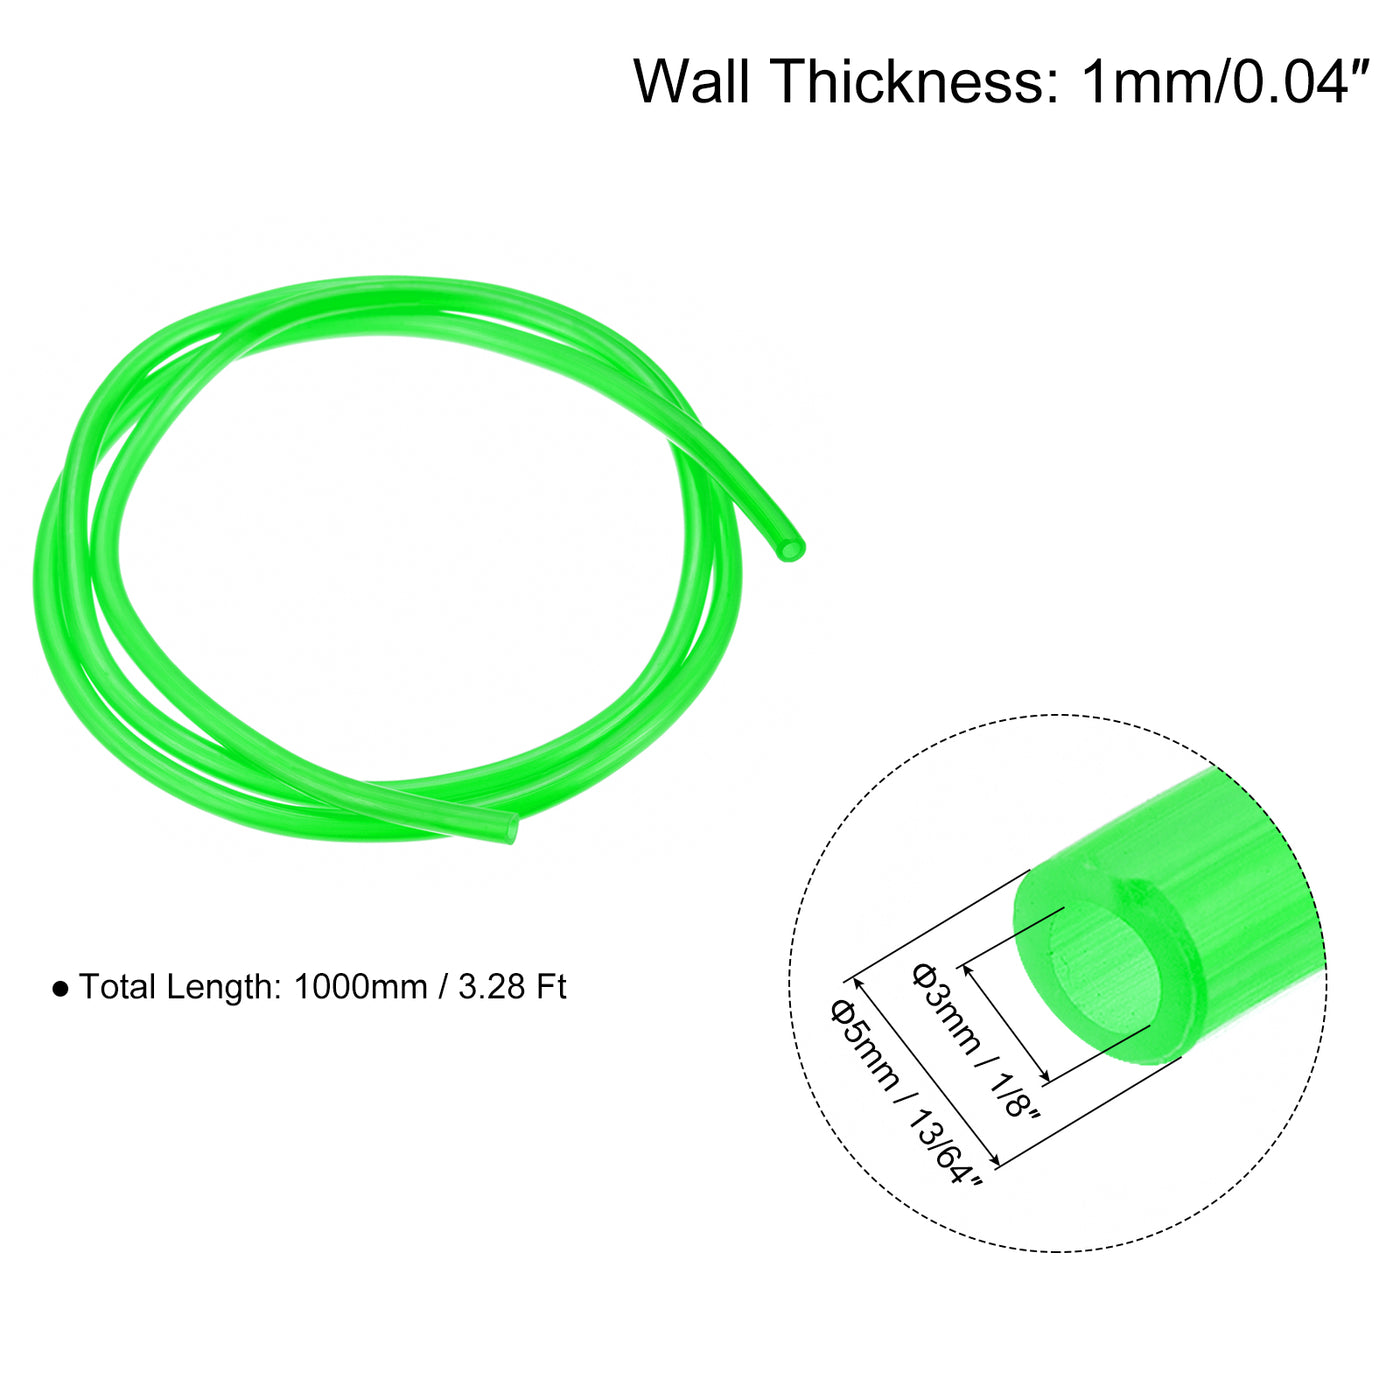 uxcell Uxcell Color Hose Tubing 1/8" ID, 13/64" OD 4Pcs 3.28 Ft for Pump Transfer, Green